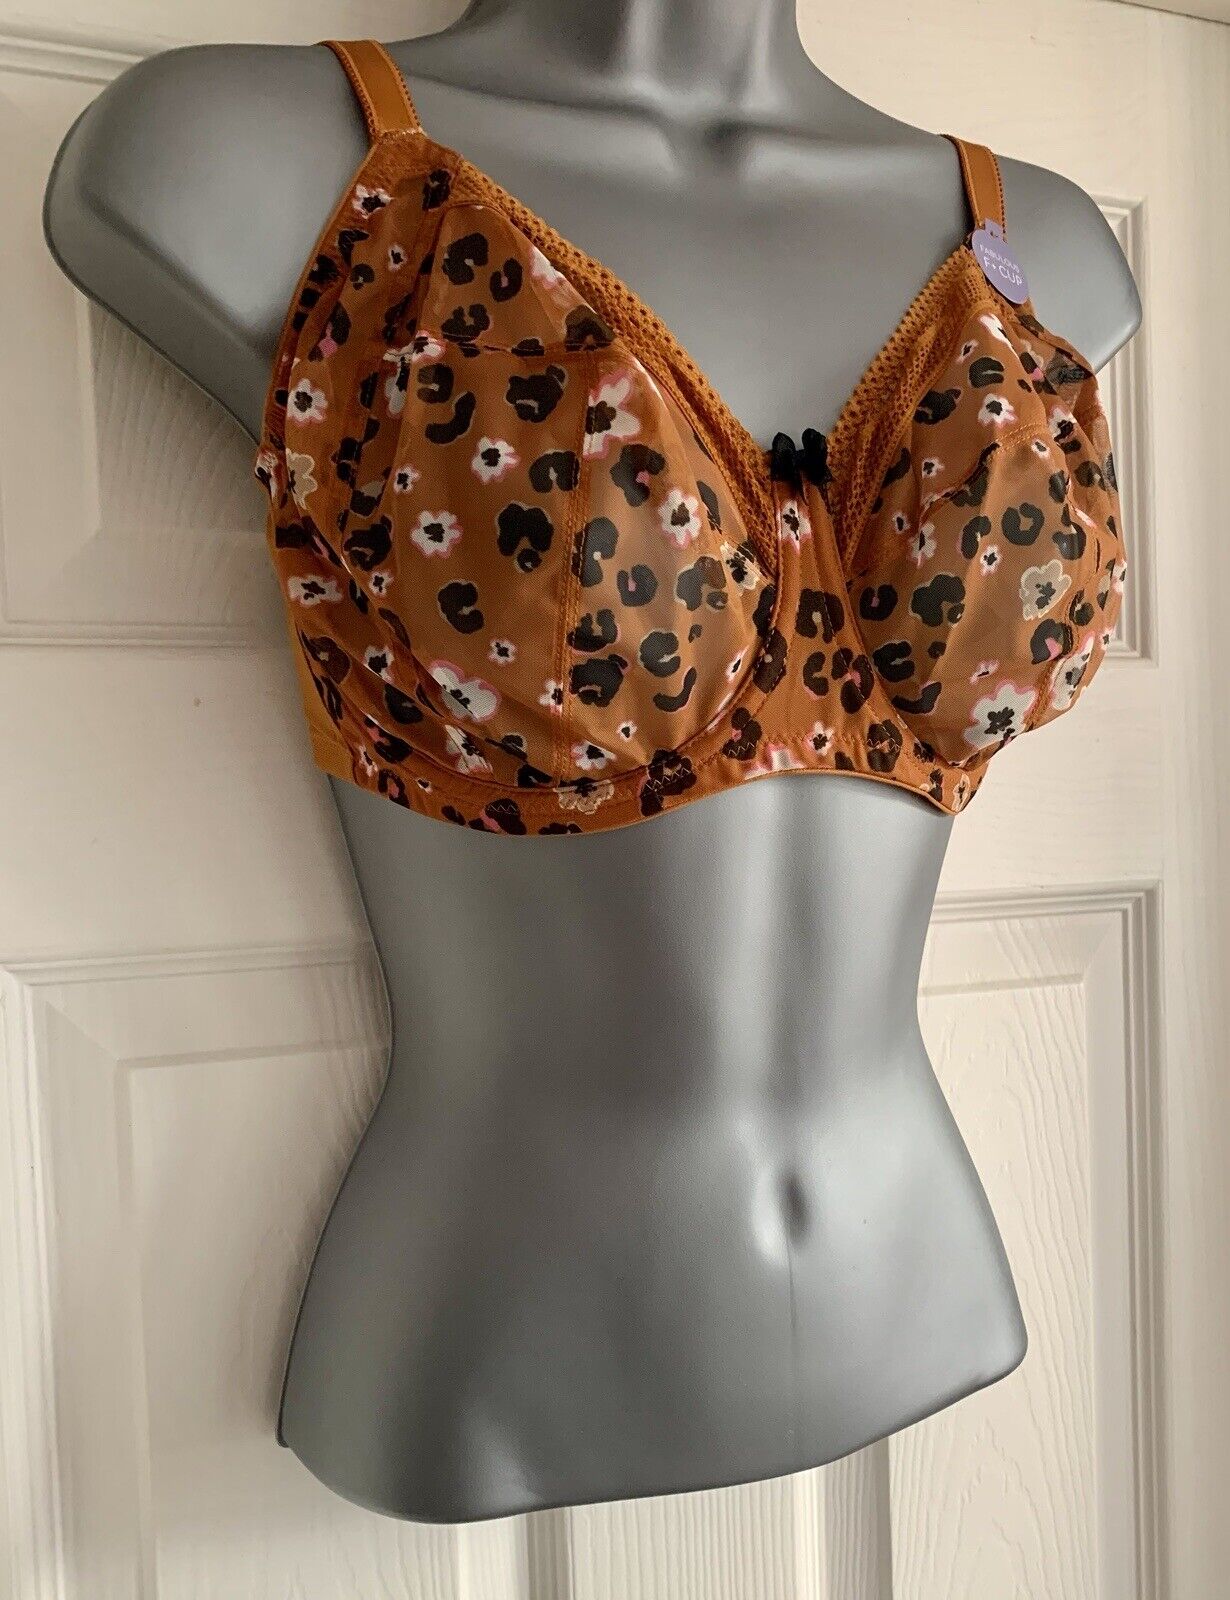 EX M*S Ginger Printed Mesh Underwired Max Support Bra Sizes 32G, 32GG, 32H